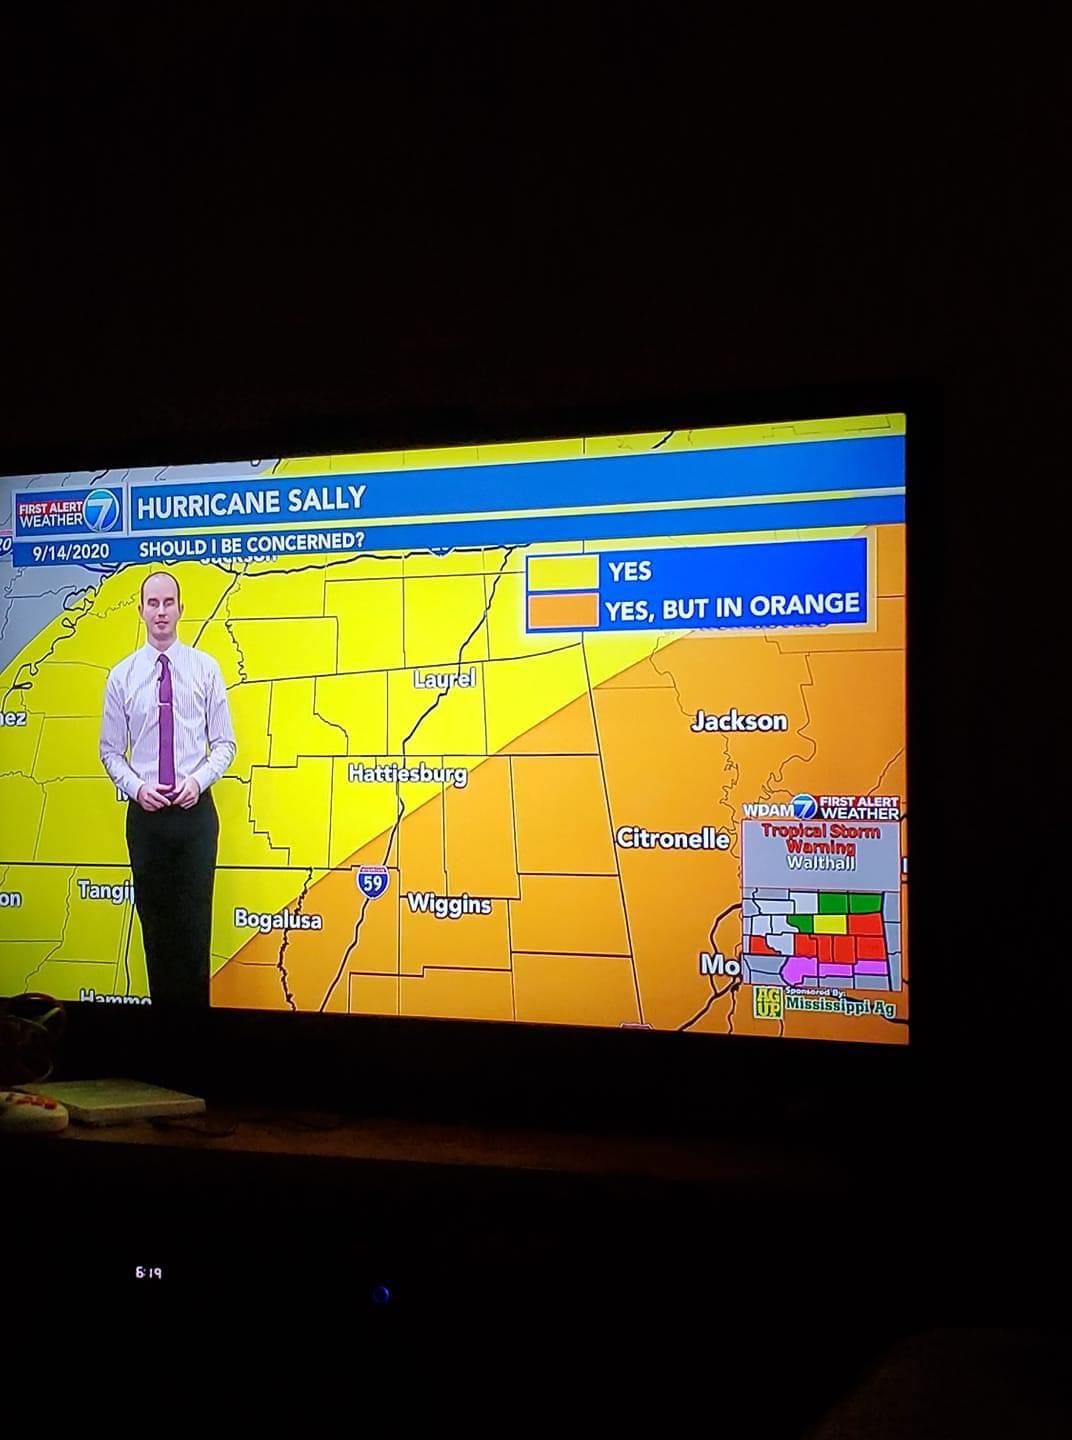 Our weather guy is so done with the stupid questions.